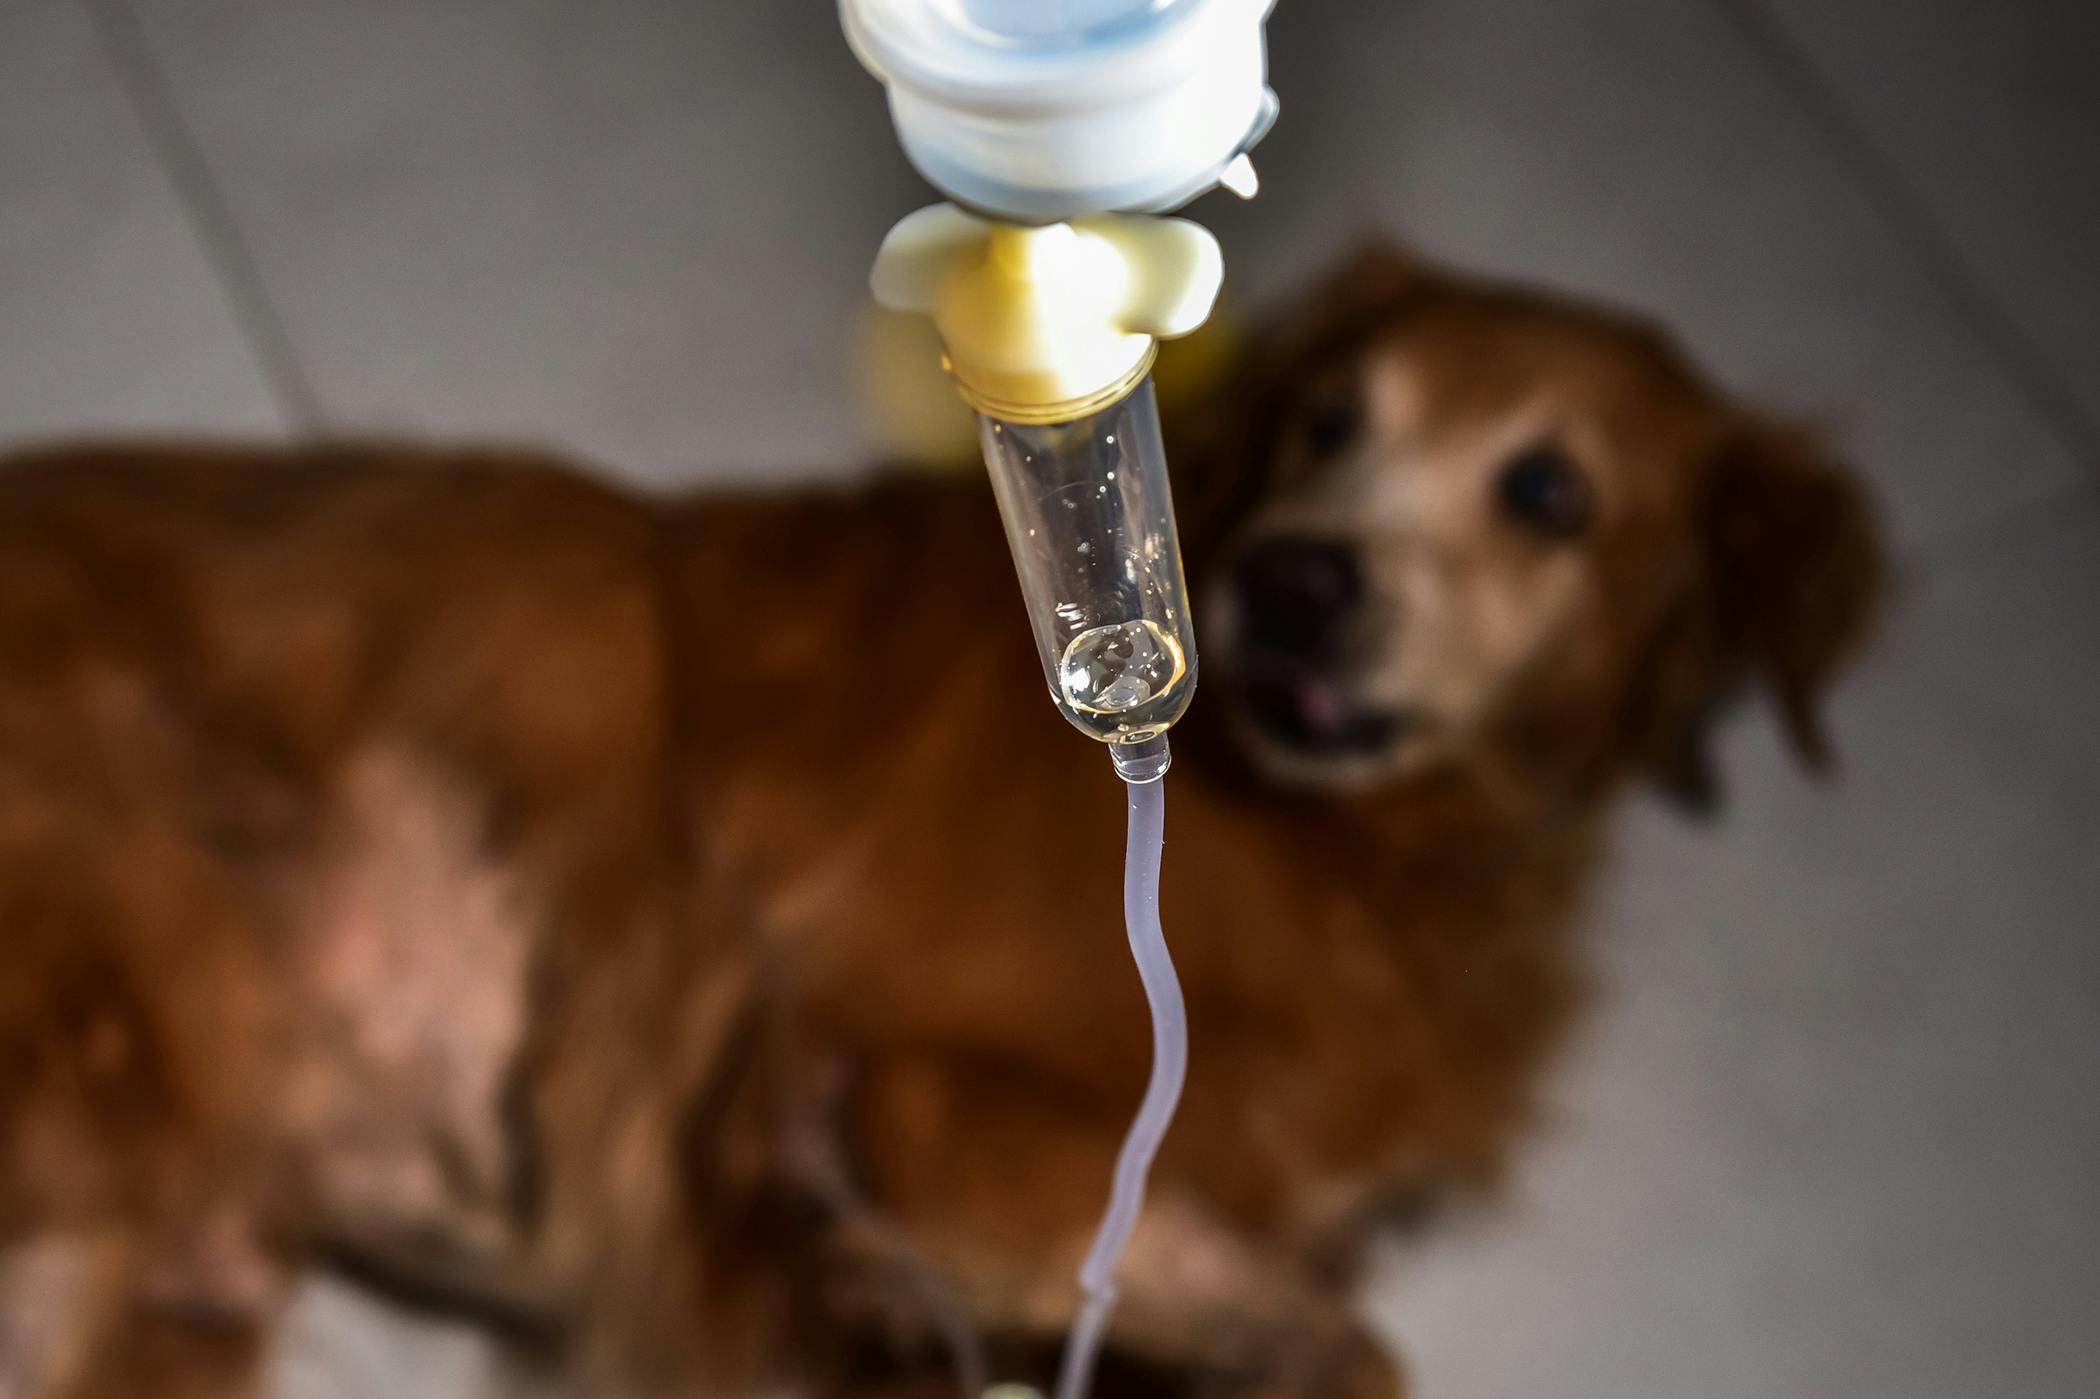 how much is a dog blood transfusion